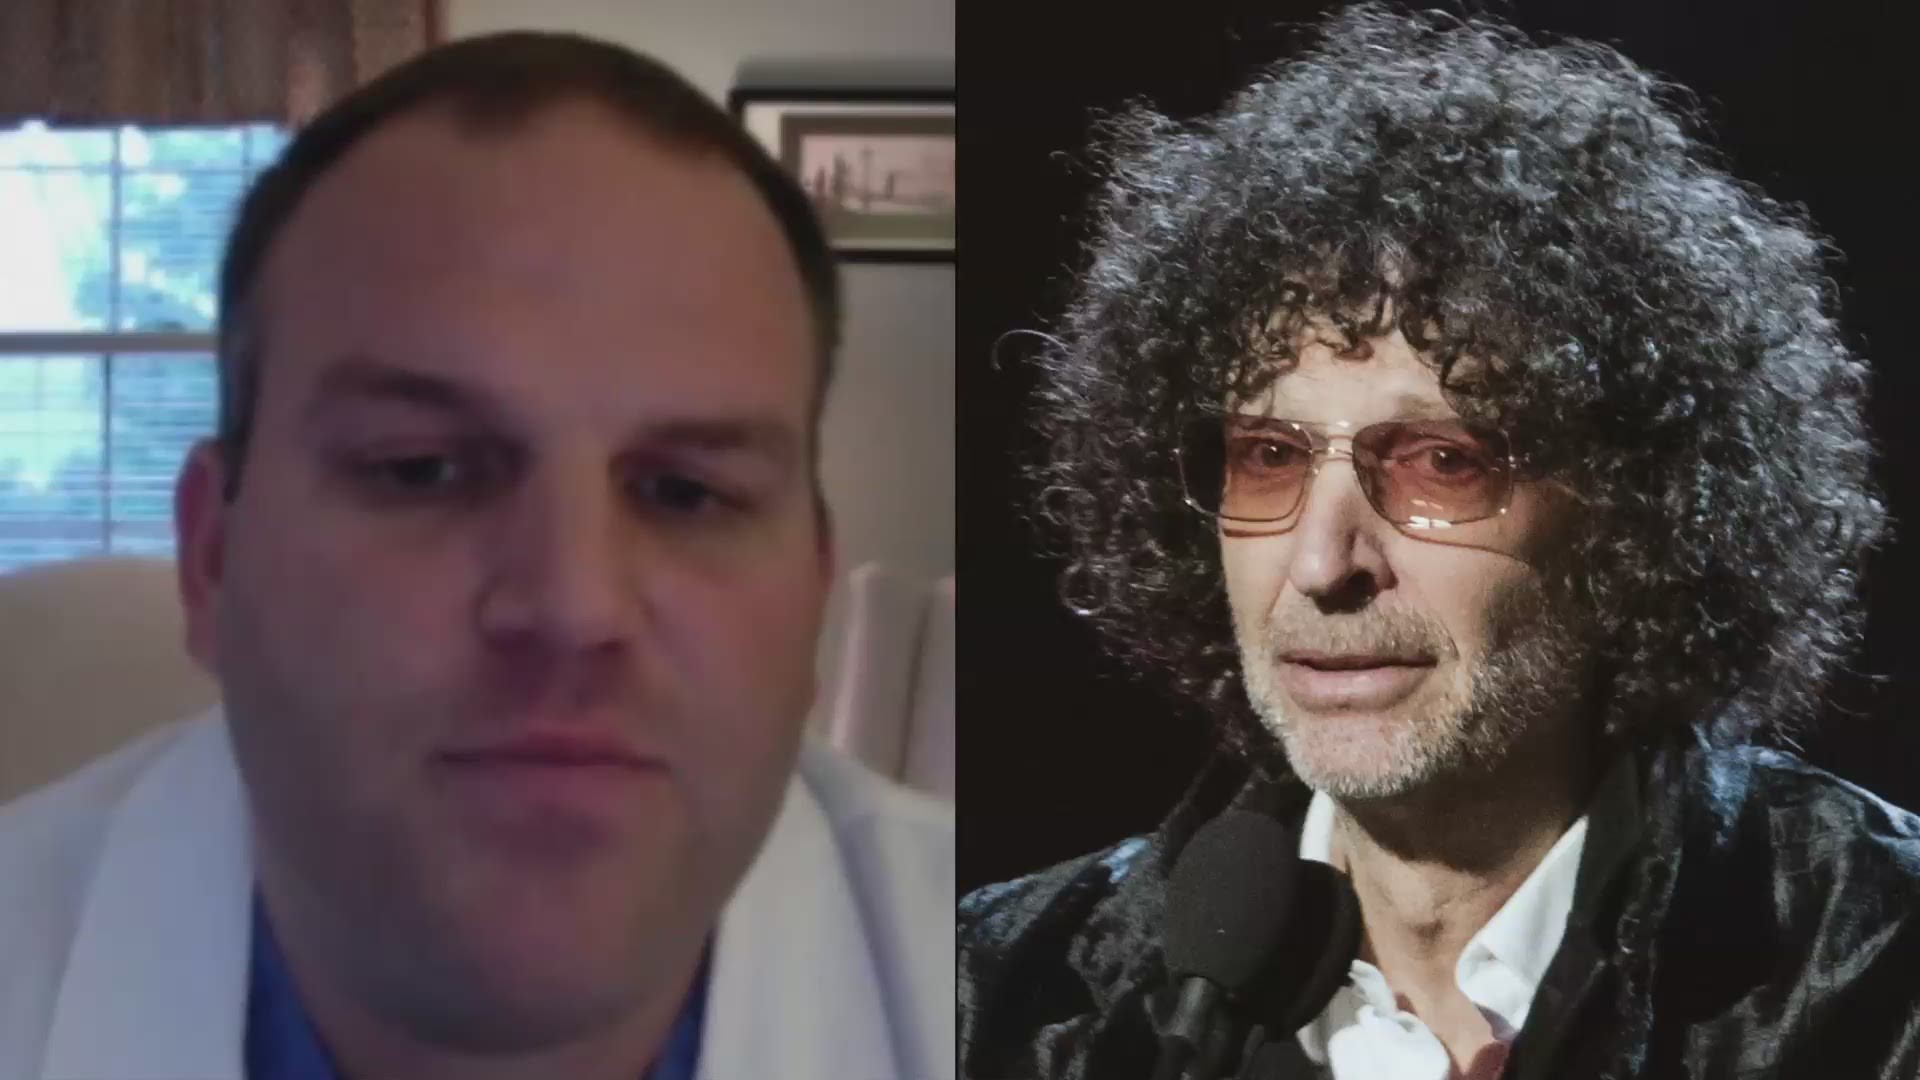 A local doctor called 'The Howard Stern Show' to recount his journey treating ICU patients & criticize the U.S.'s response. "We are drowning and we are in hell."